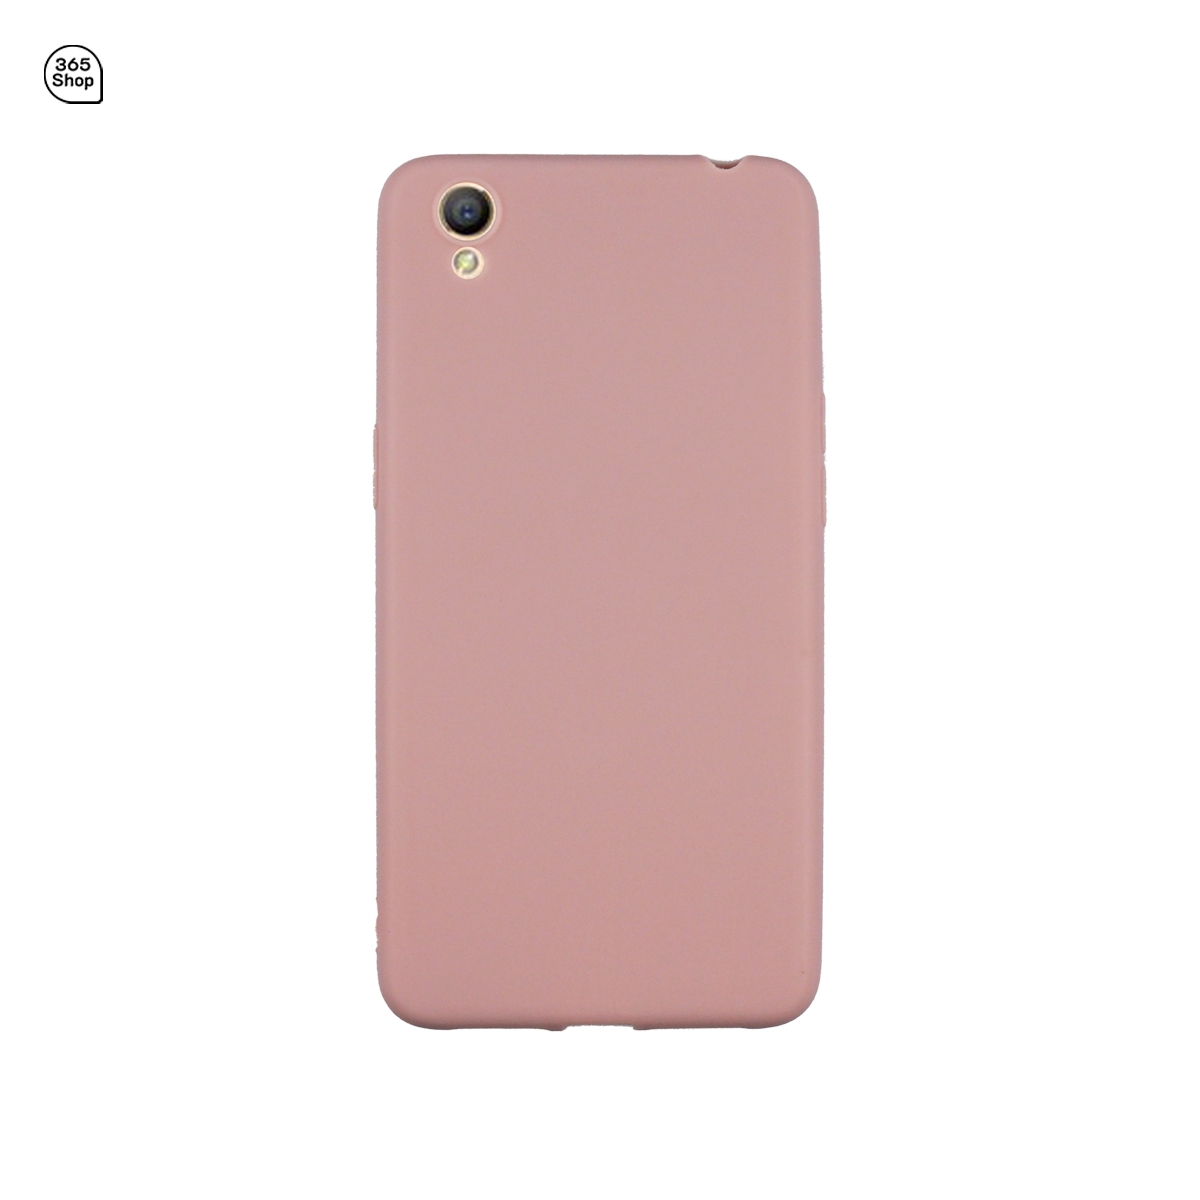 Oppo A37 Price Philippines Home Credit ~ Oppo Smartphone